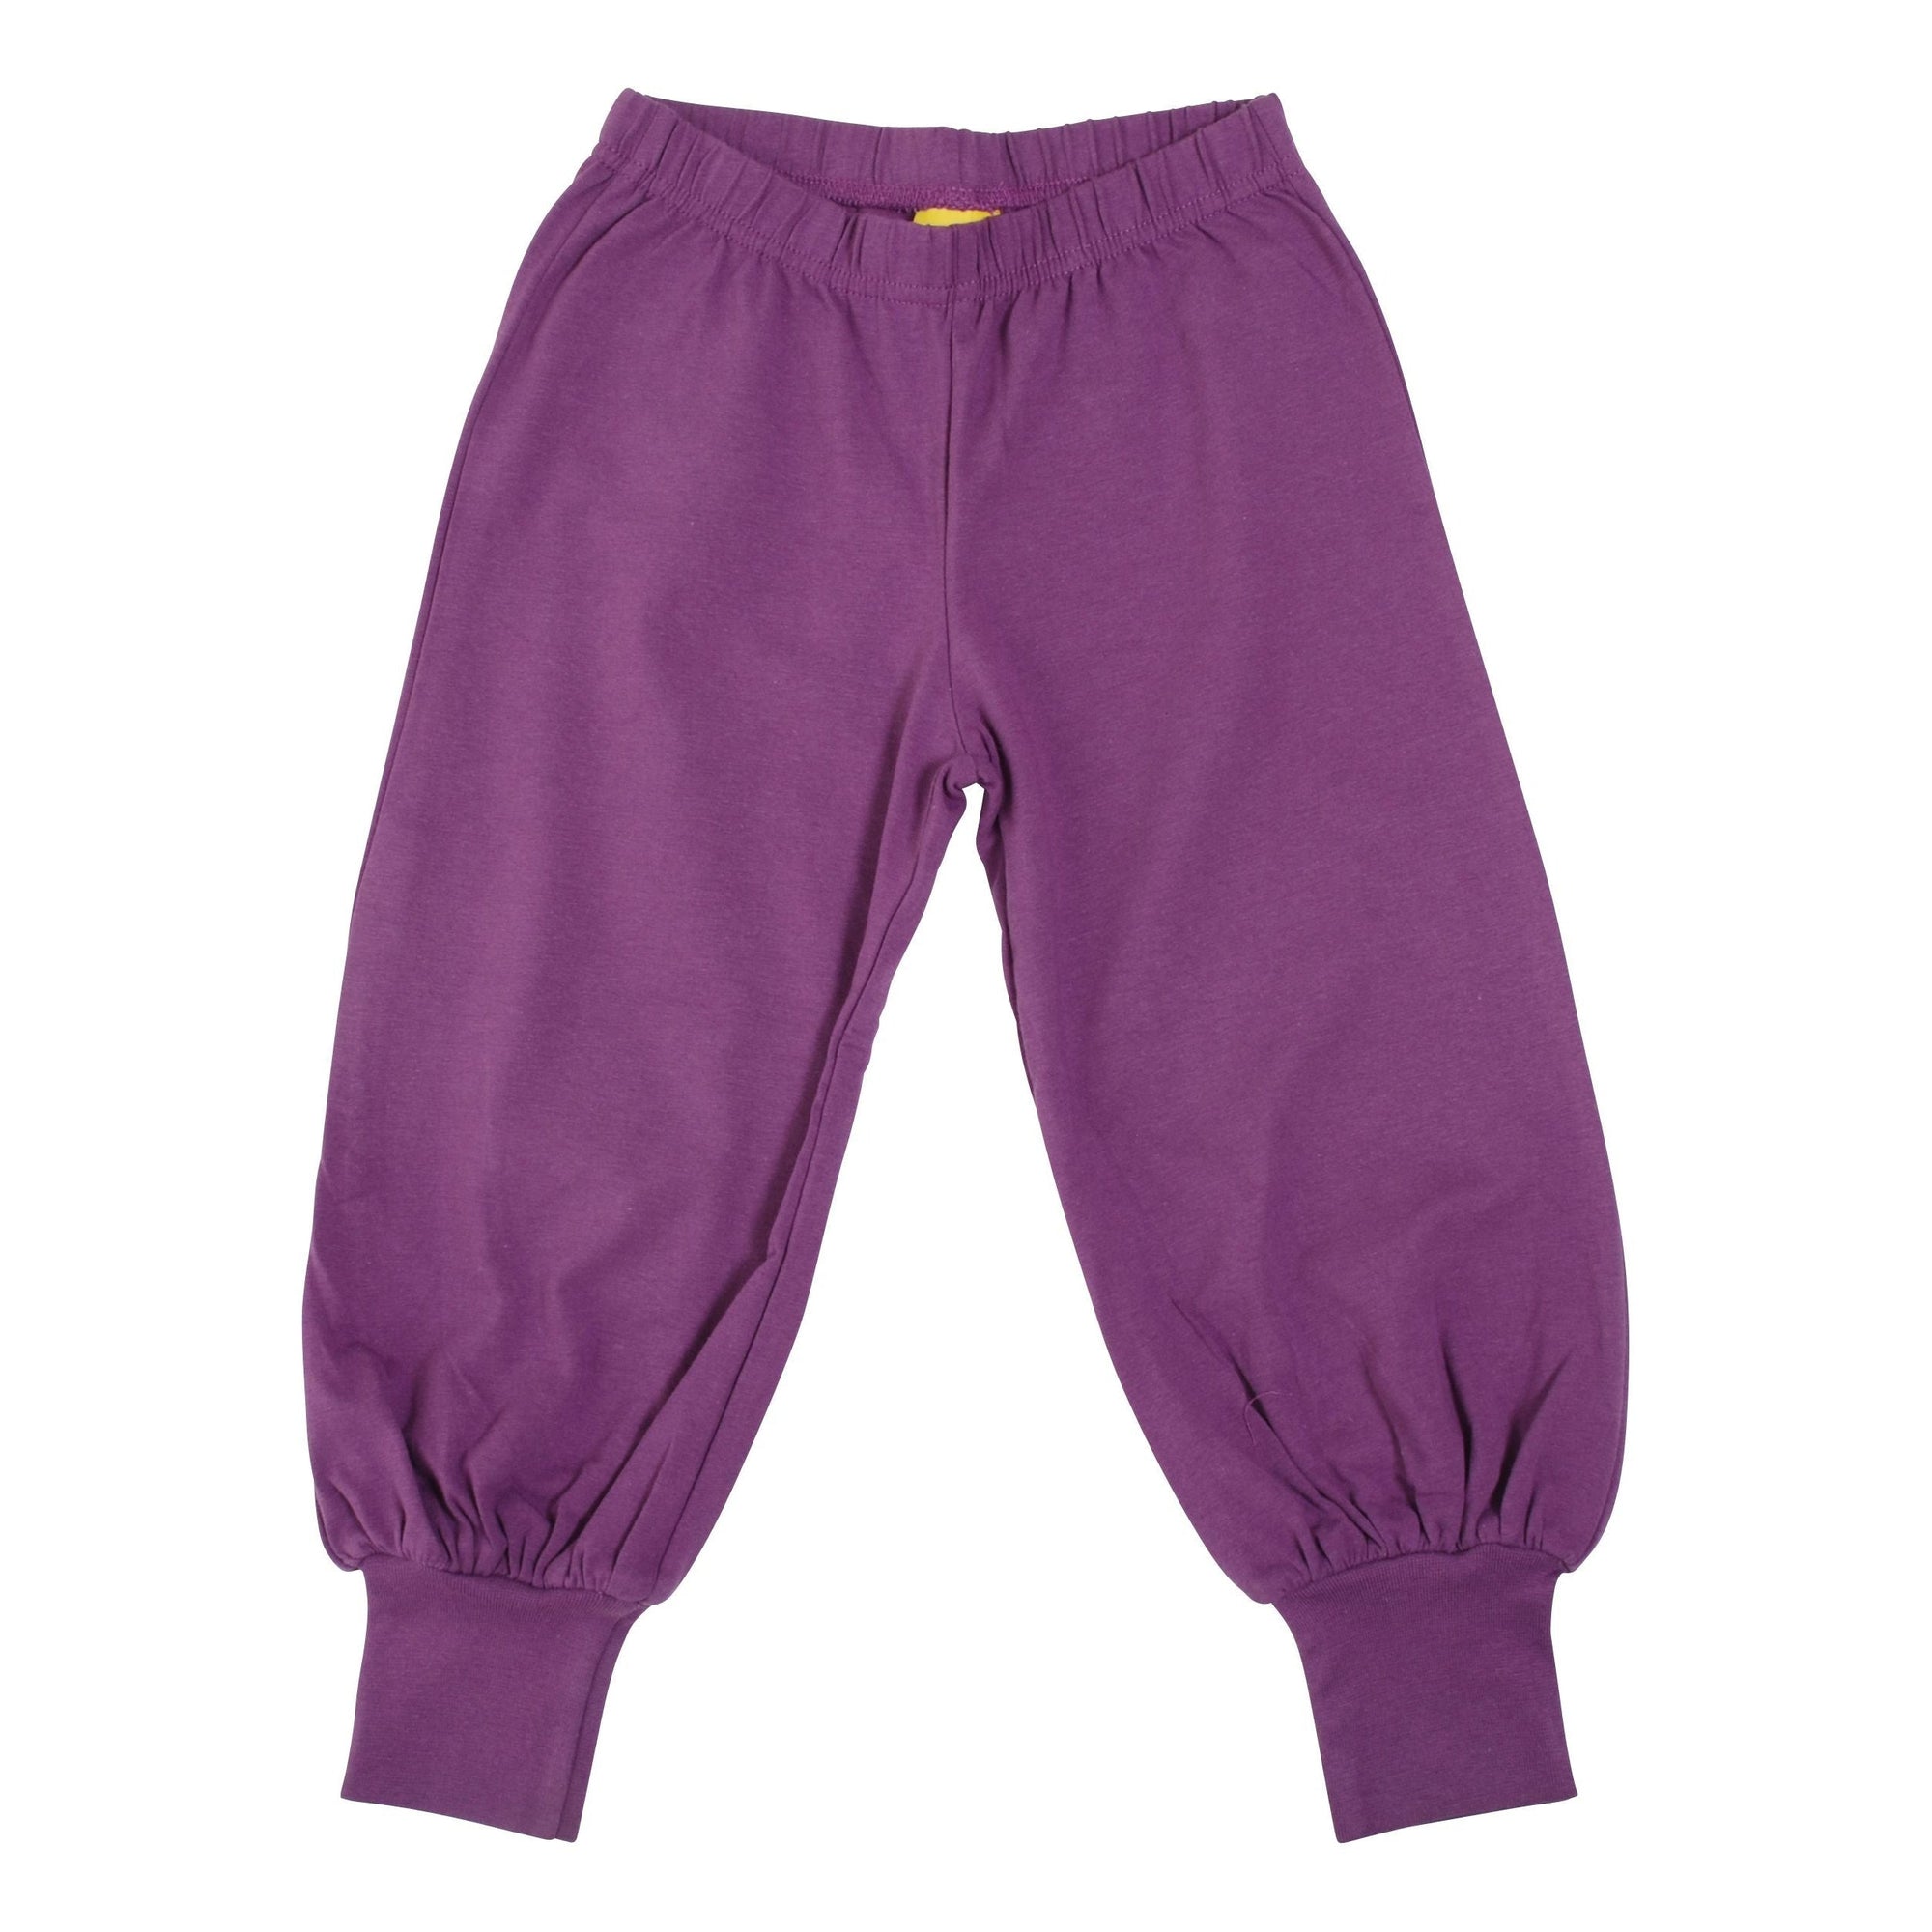 Crushed Grape Baggy Pants - 2 Left Size 10-12 & 12-14 years-More Than A Fling-Modern Rascals